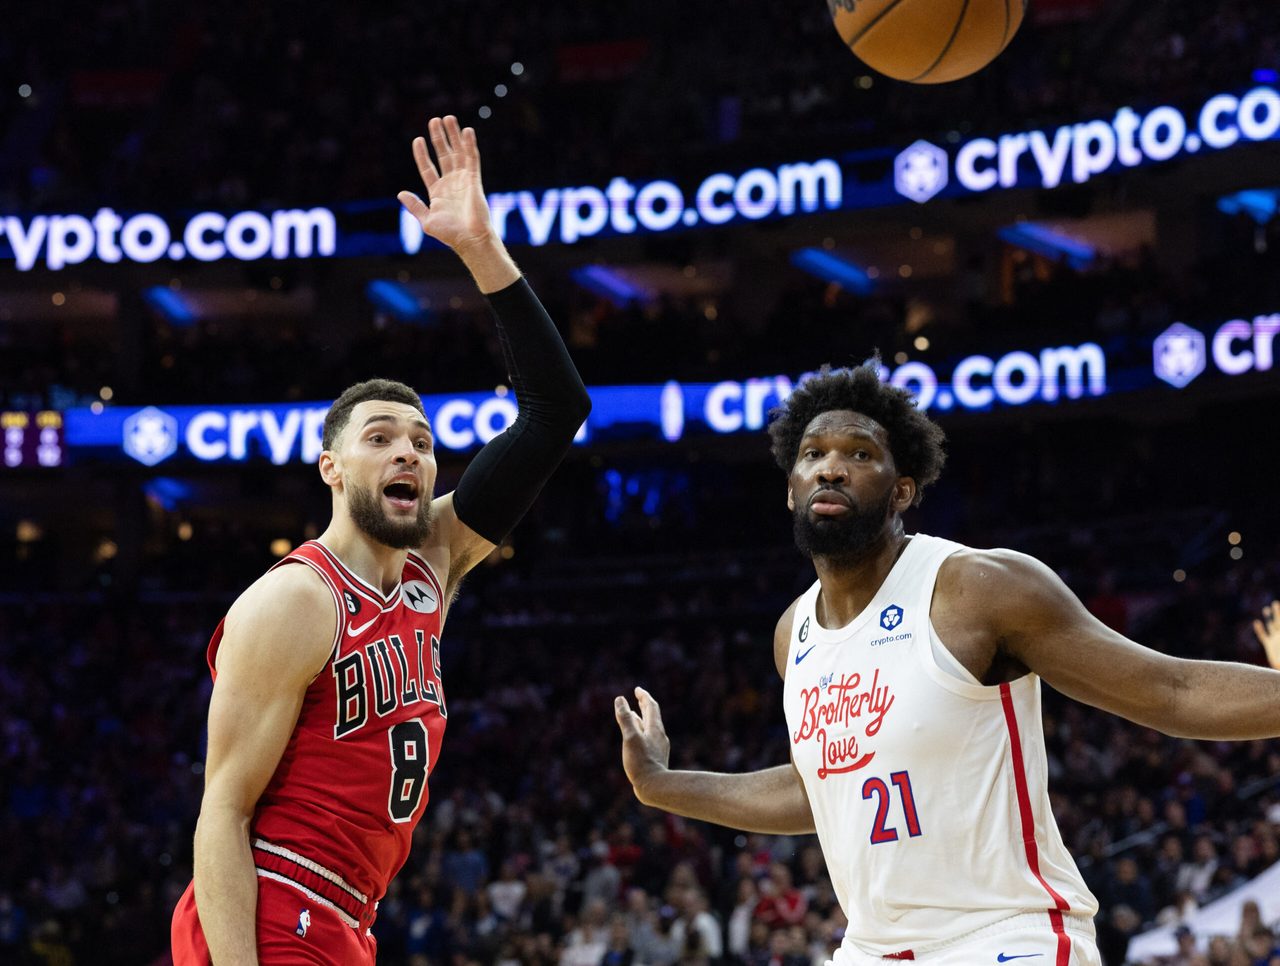 Bulls lean on allaround effort to withstand Sixers in double OT